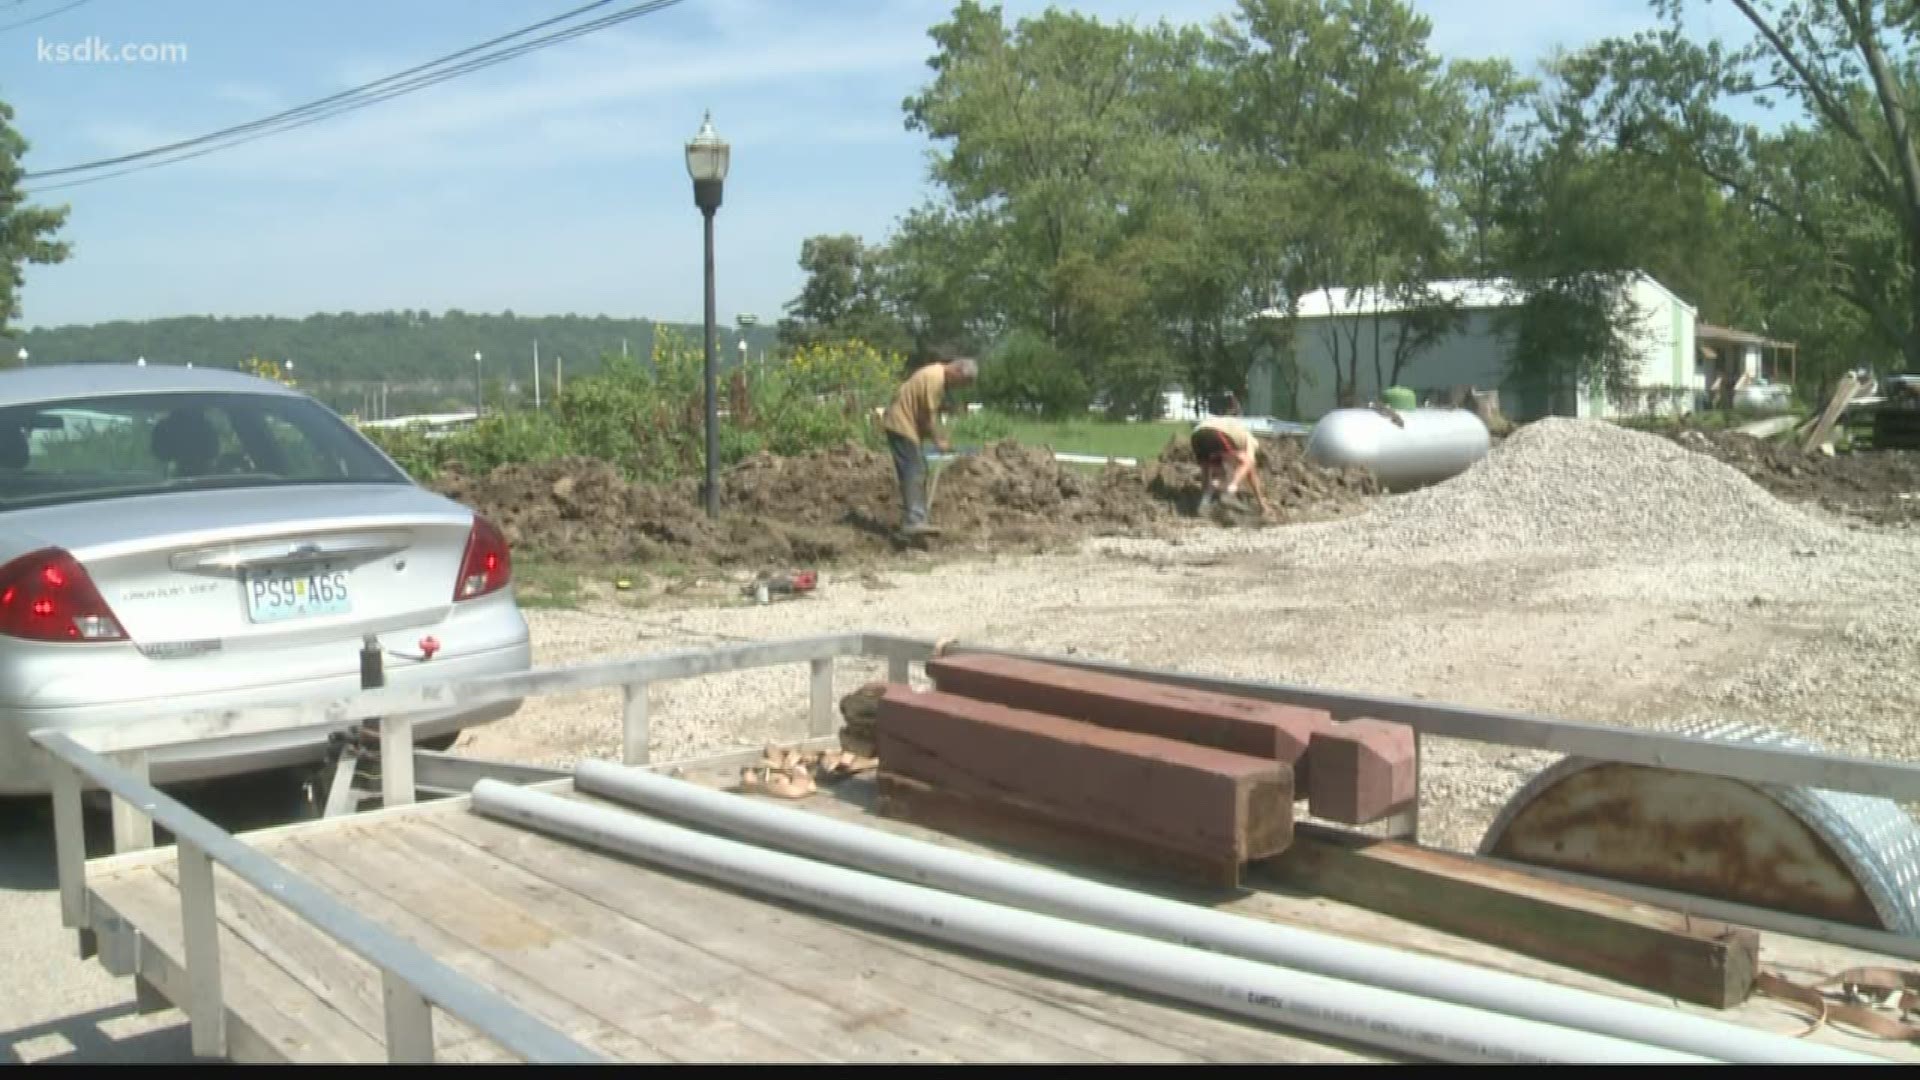 The record river levels brought on by spring and summer rain may be over, but people living in the flood zones are still underwater and homes are under construction.